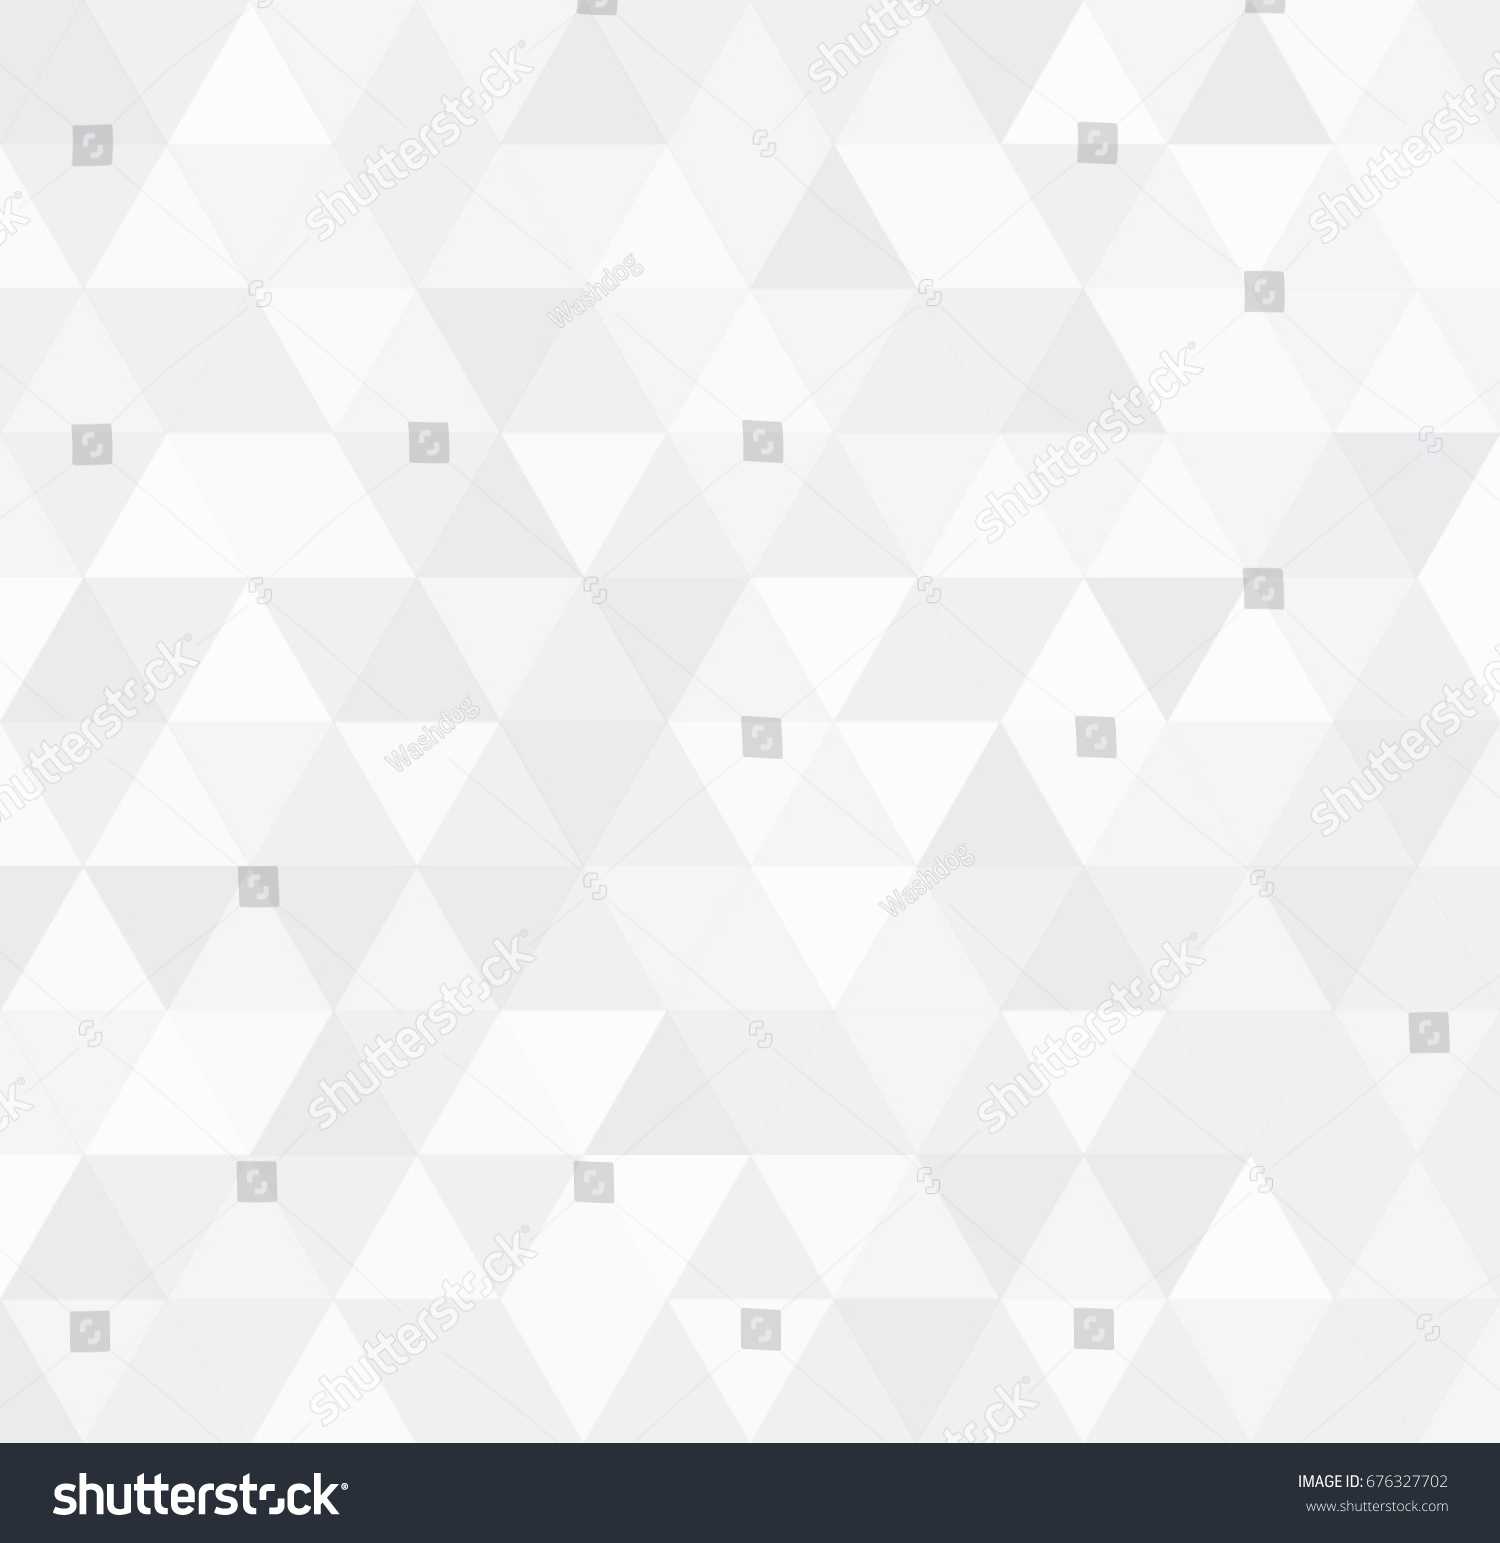 White retro triangle background, Abstract square mosaic background, Square background vector #676327702